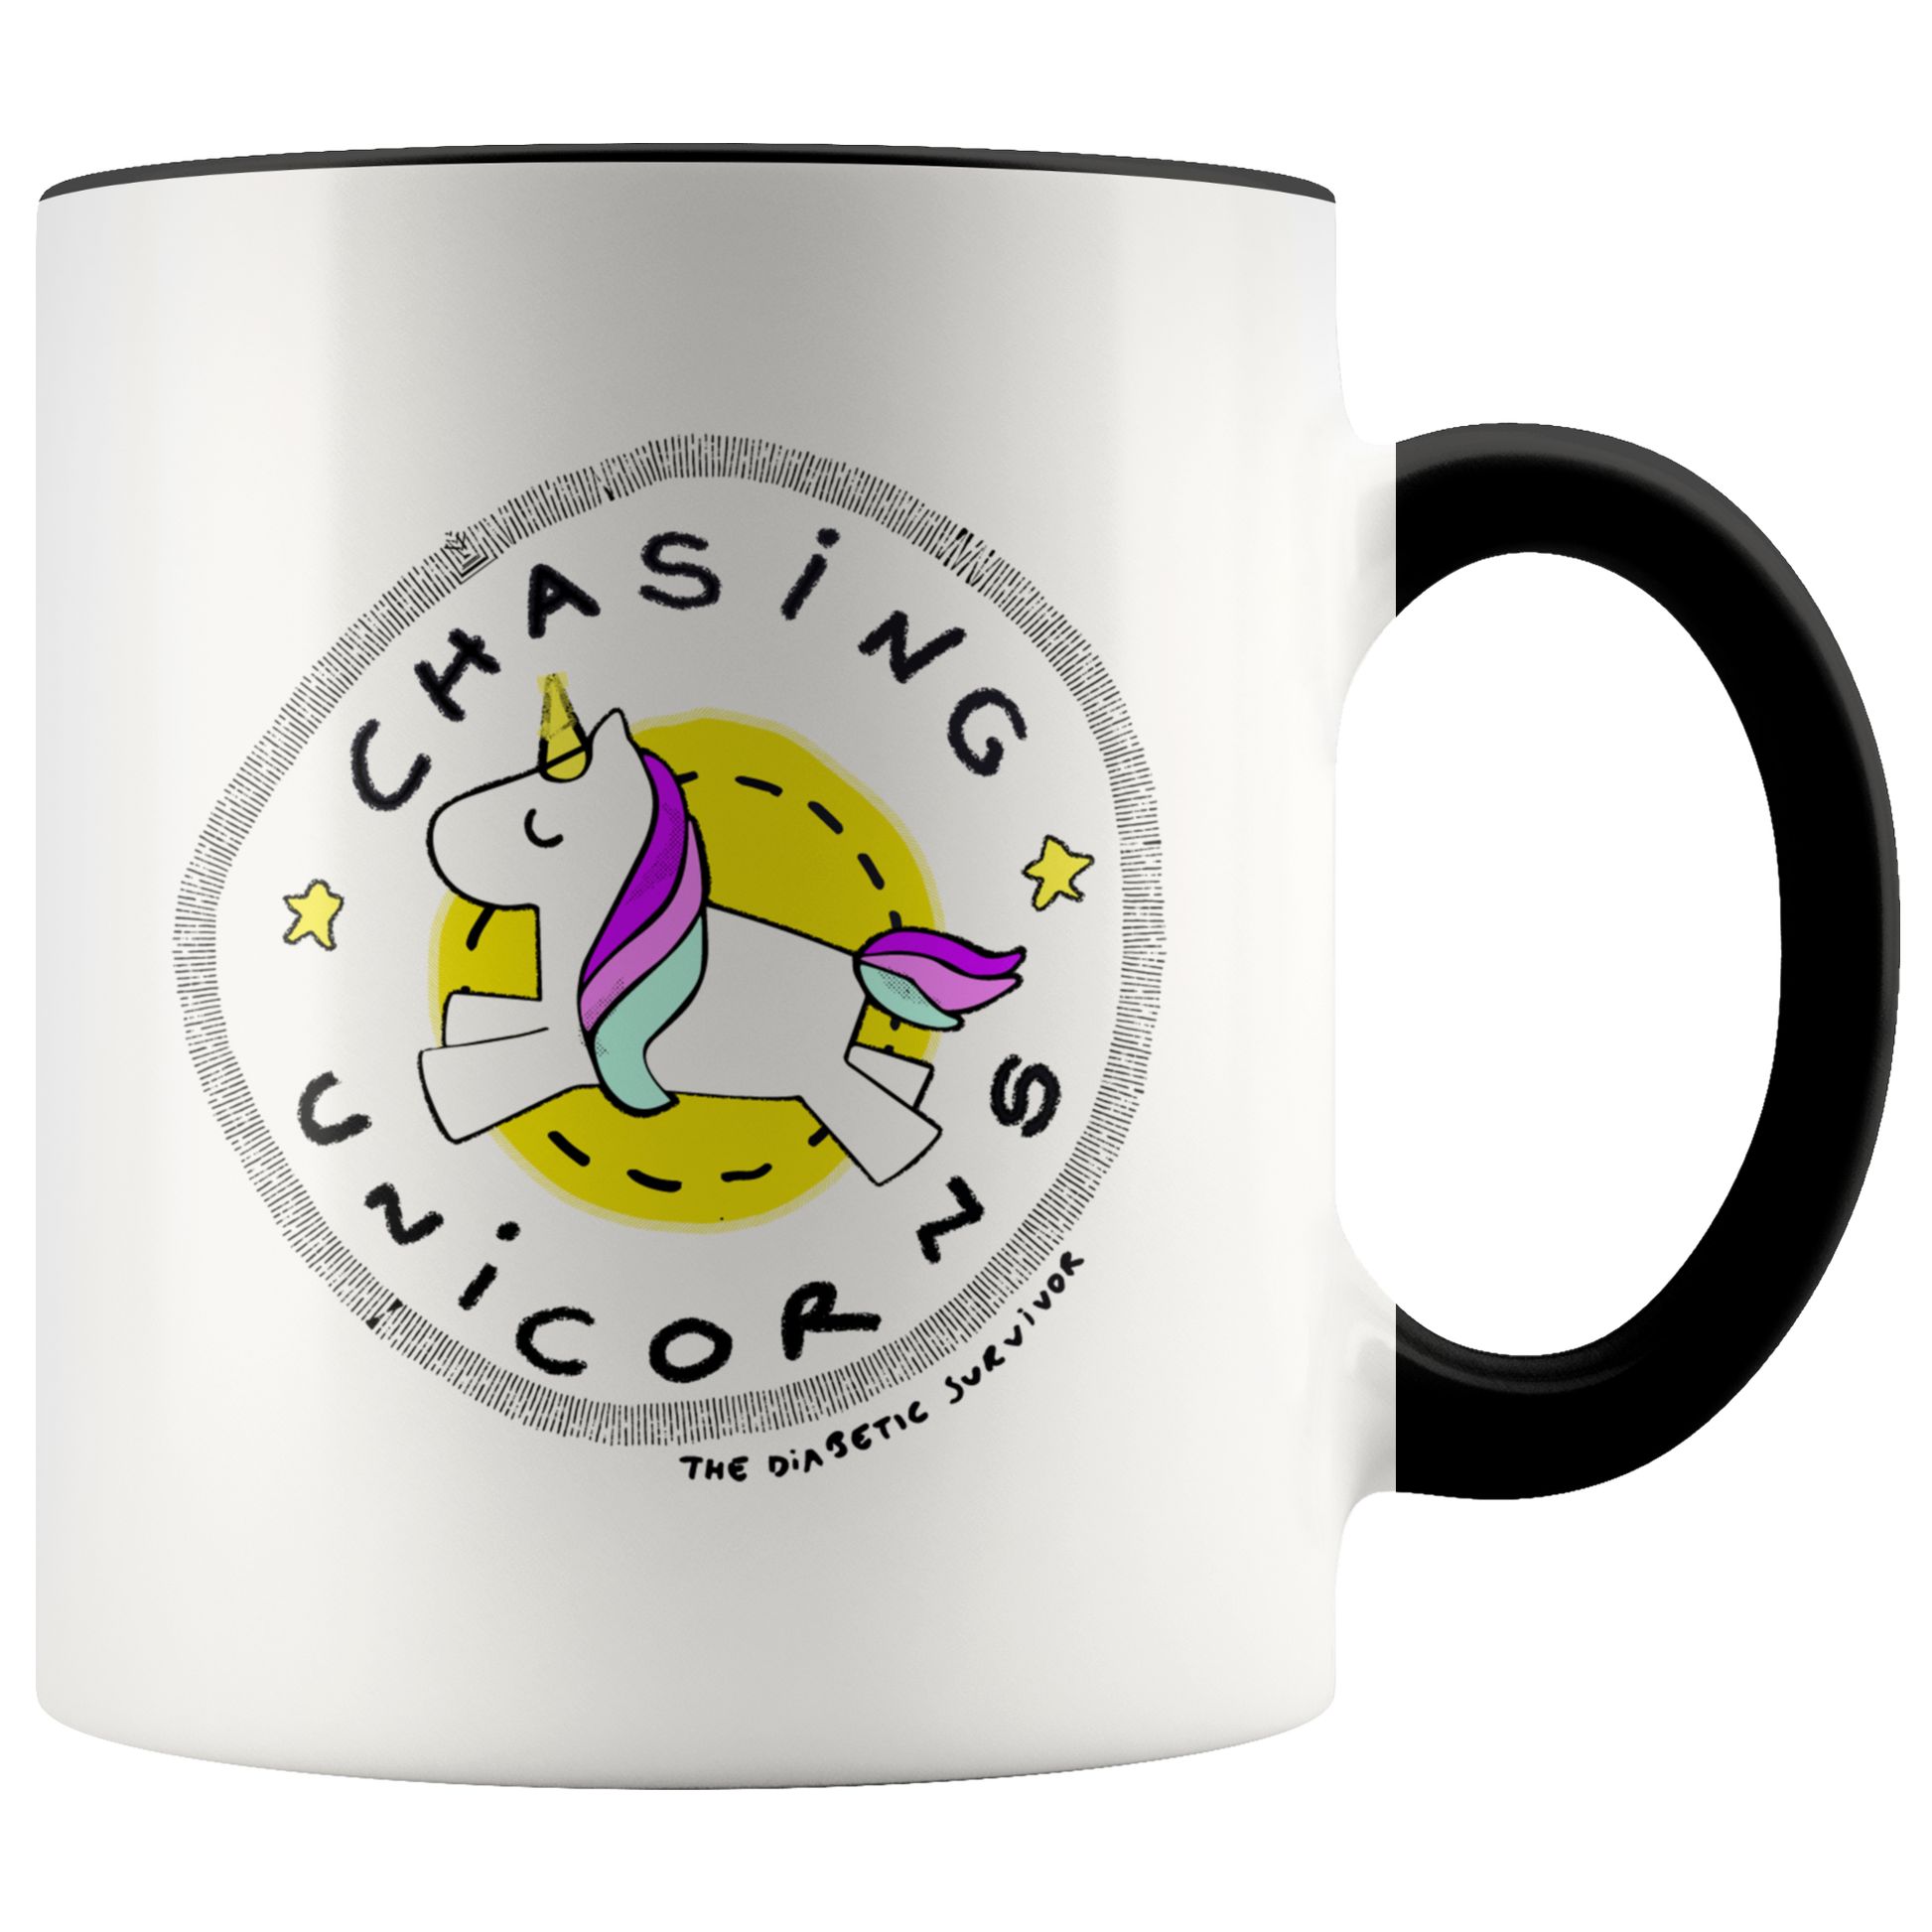 mug featuring a white unicorn surrounded by the message 'Chasing Unicorns' by the diabetic survivor